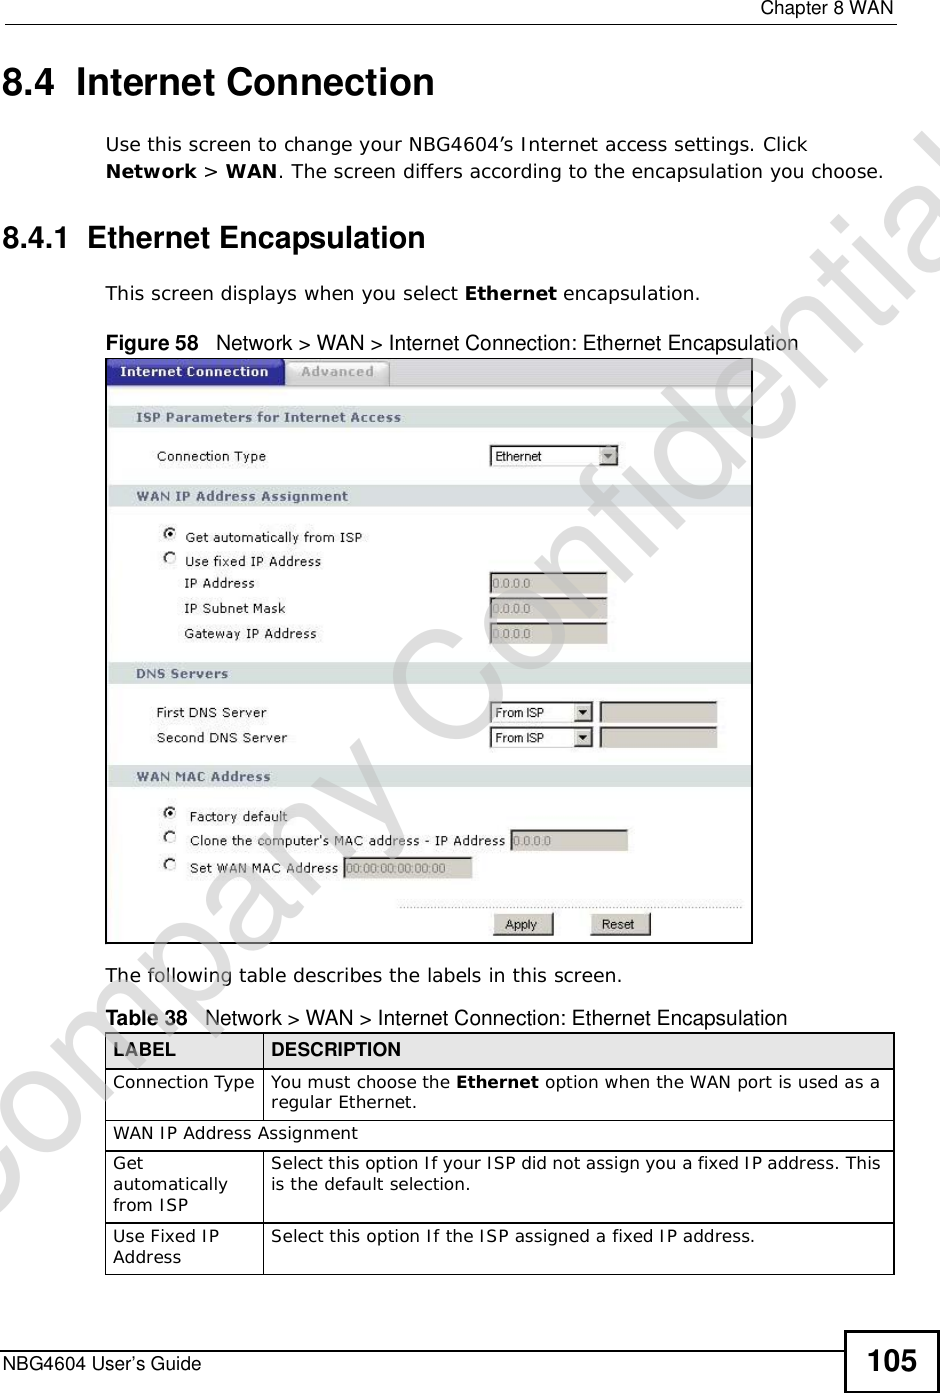  Chapter 8WANNBG4604 User’s Guide 1058.4  Internet ConnectionUse this screen to change your NBG4604’s Internet access settings. Click Network &gt; WAN. The screen differs according to the encapsulation you choose.8.4.1  Ethernet EncapsulationThis screen displays when you select Ethernet encapsulation.Figure 58   Network &gt; WAN &gt; Internet Connection: Ethernet EncapsulationThe following table describes the labels in this screen.Table 38   Network &gt; WAN &gt; Internet Connection: Ethernet EncapsulationLABEL DESCRIPTIONConnection Type You must choose the Ethernet option when the WAN port is used as a regular Ethernet.WAN IP Address Assignment Getautomatically from ISP Select this option If your ISP did not assign you a fixed IP address. This is the default selection. Use Fixed IP Address Select this option If the ISP assigned a fixed IP address. Company Confidential